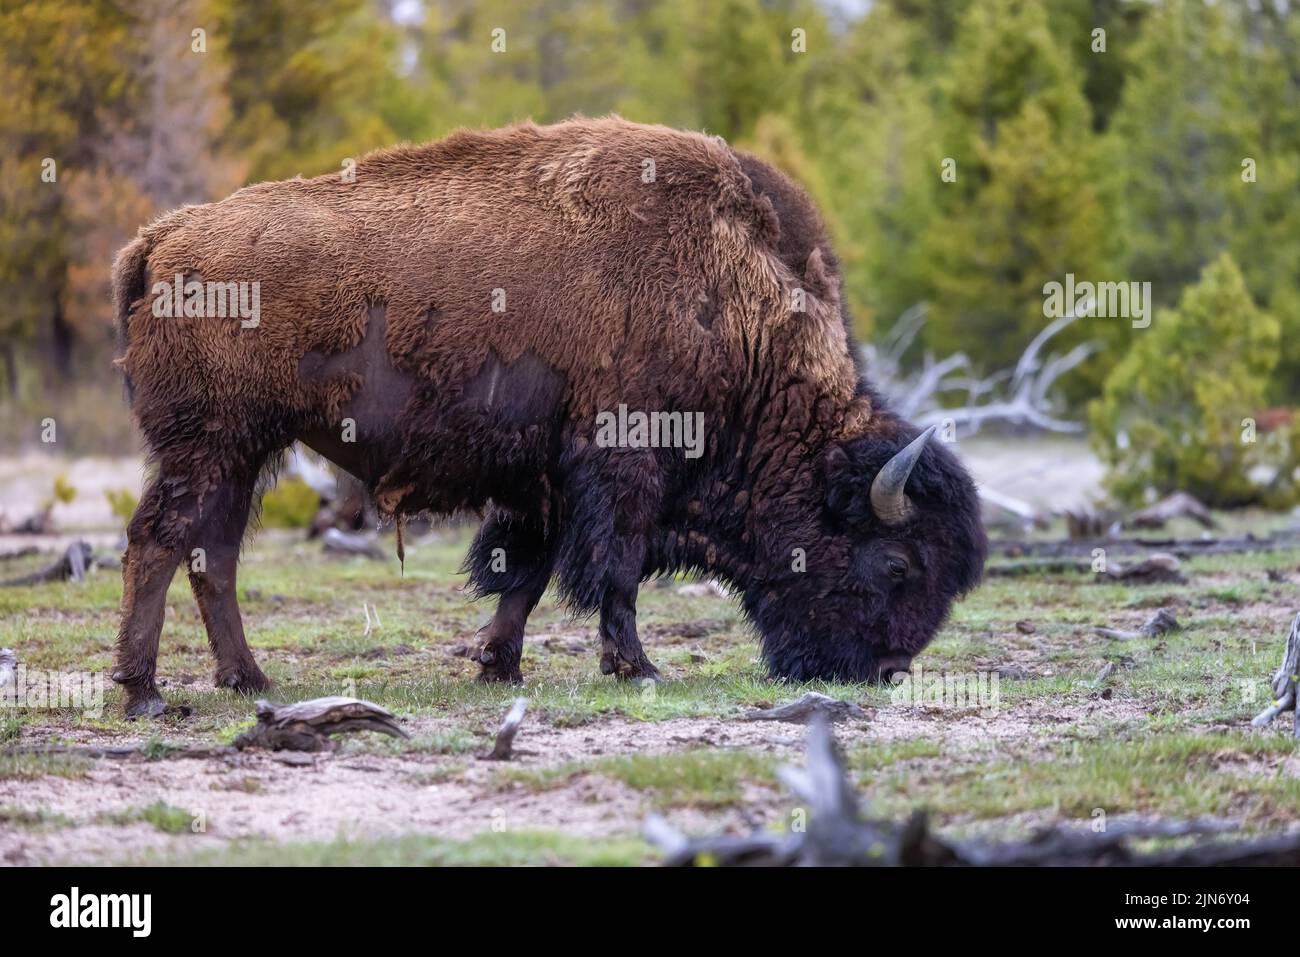 Bison eating grass in American Landscape. Yellowstone National Park Stock Photo